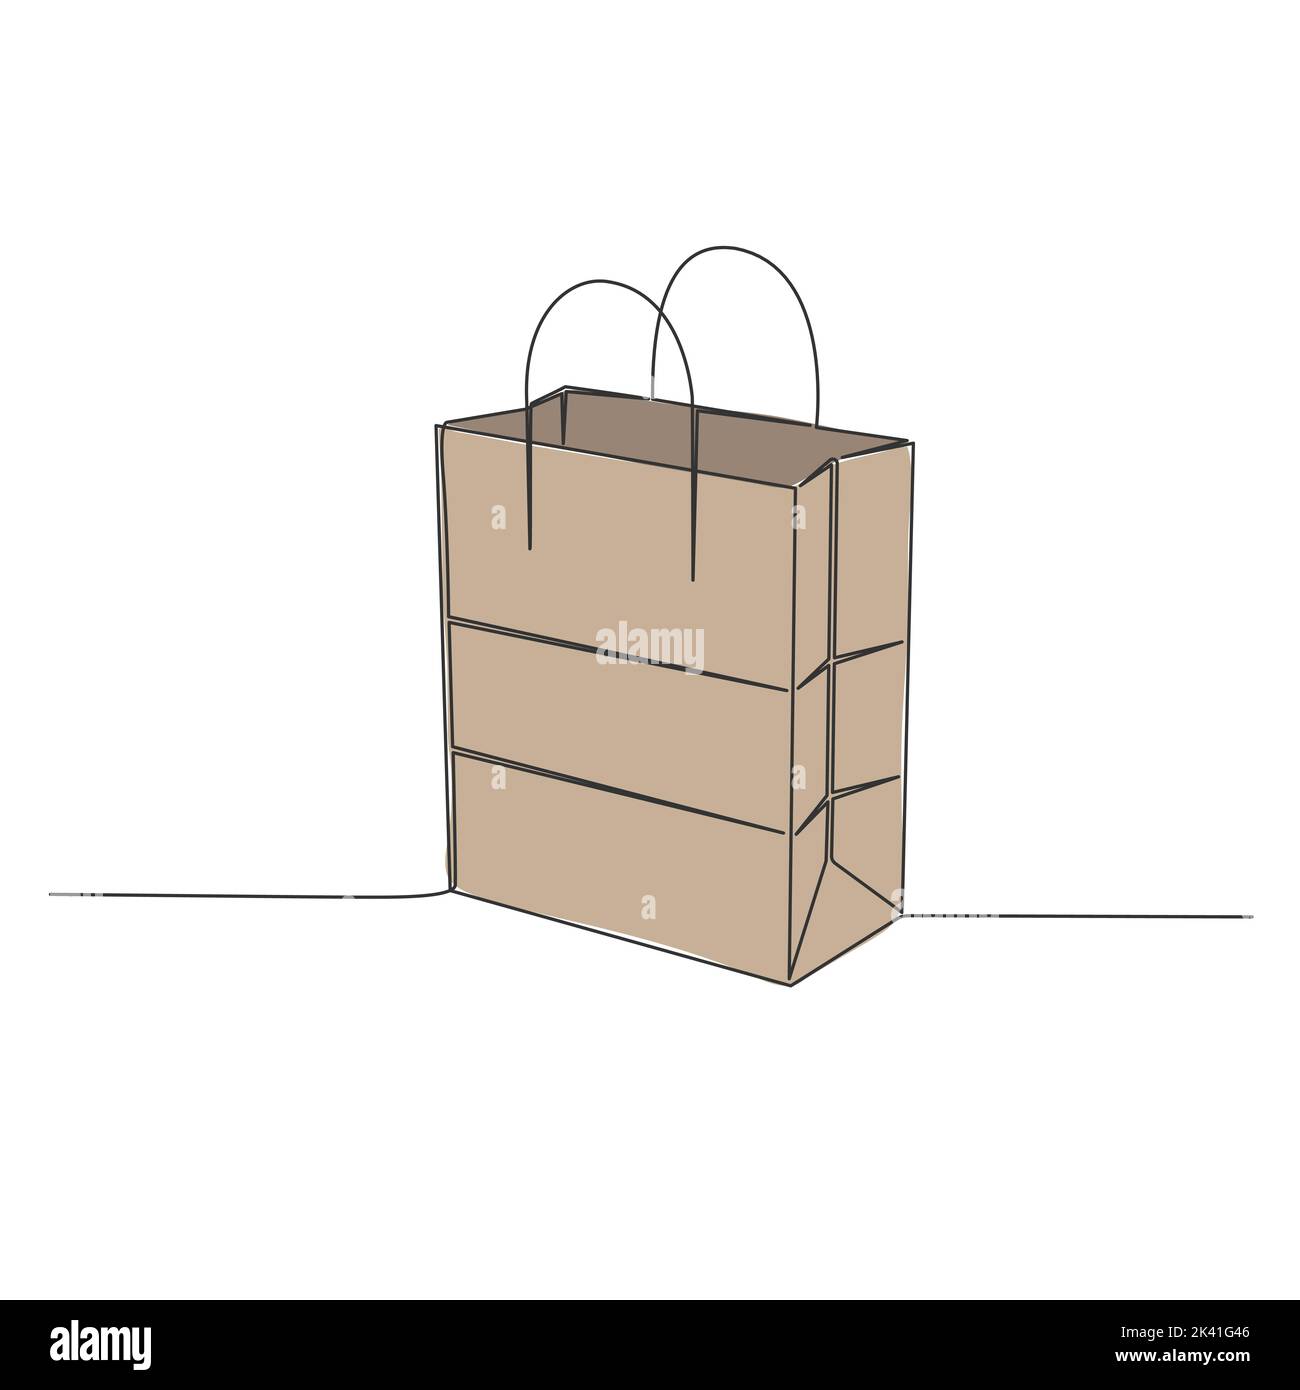 single line drawing of brown paper bag isolated on white background, line art shopping bag vector illustration Stock Vector